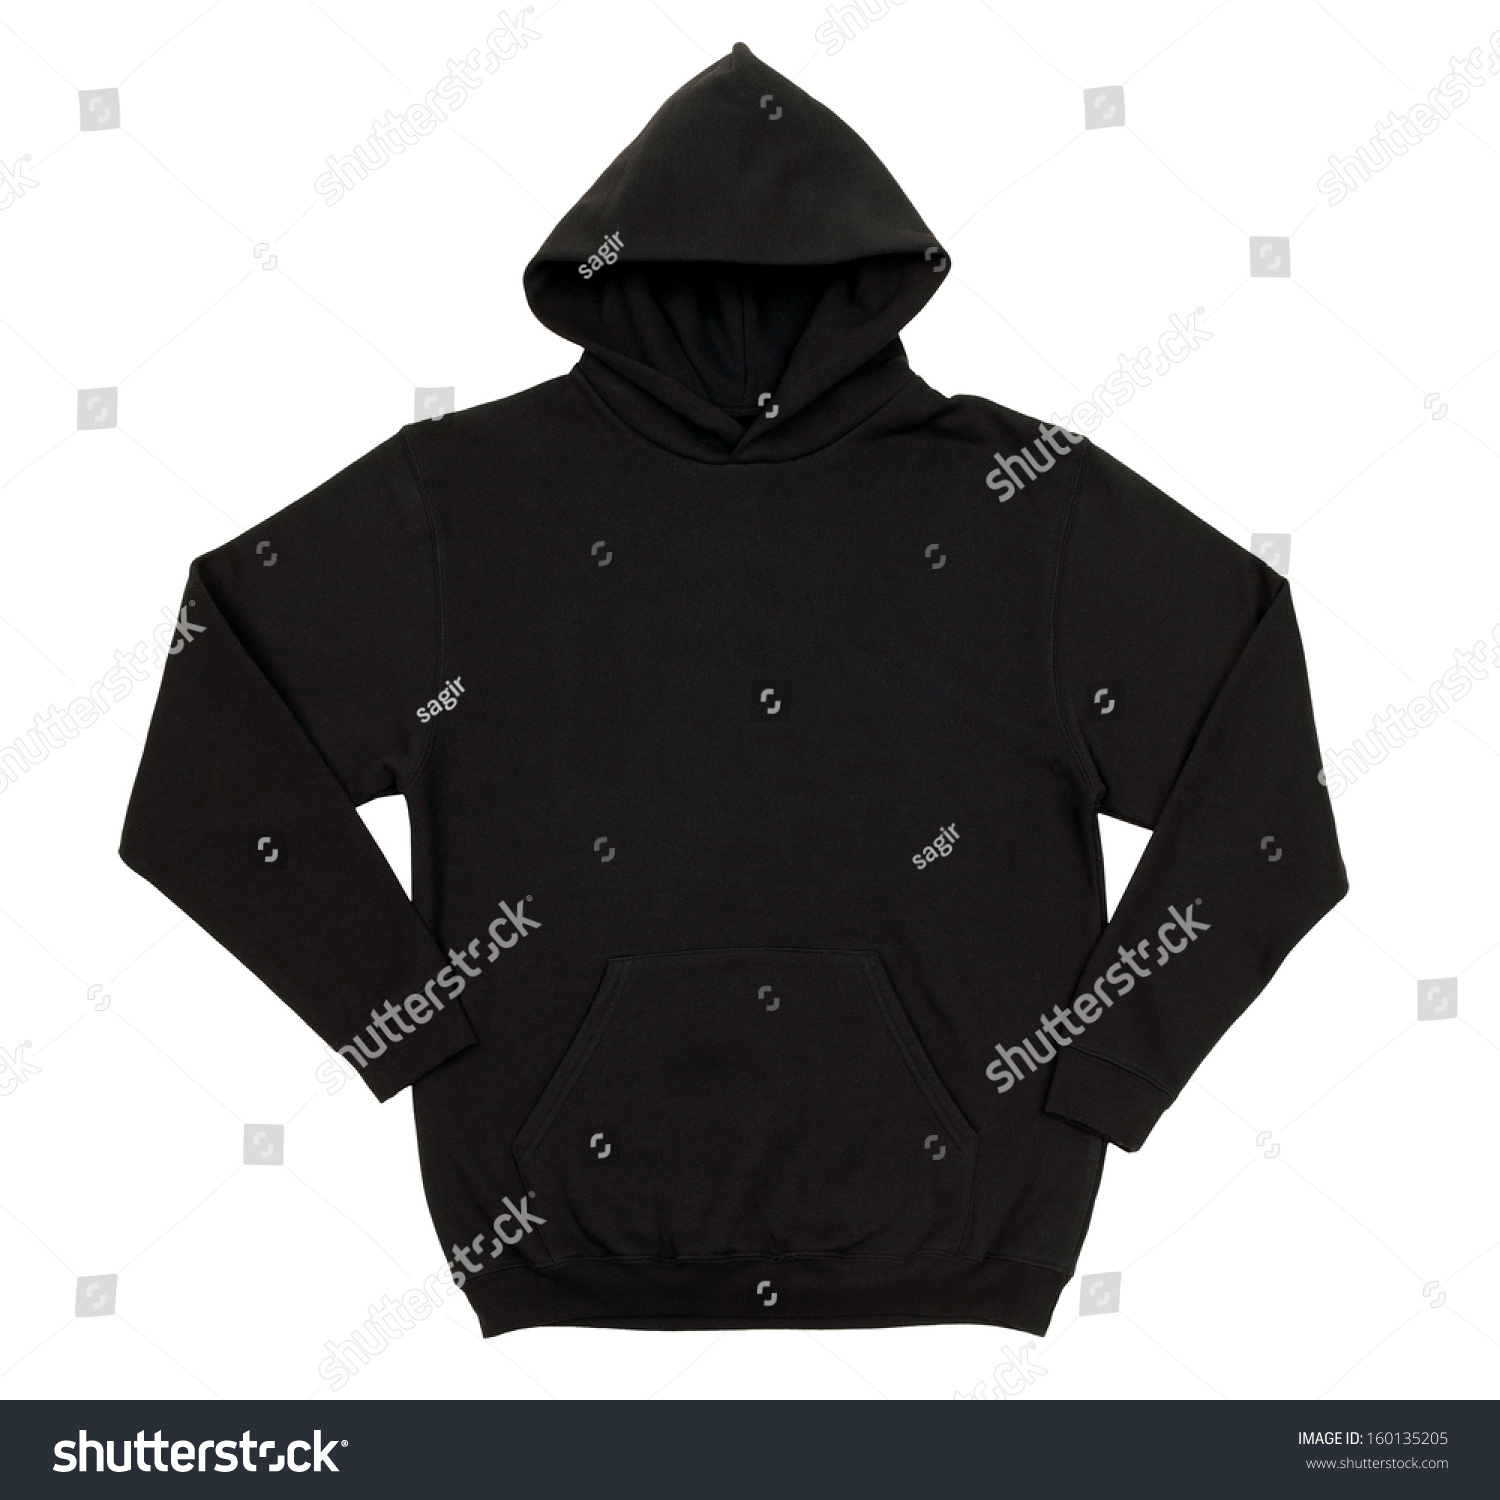 Hoodie Isolated On White Background Stock Photo 160135205 : Shutterstock